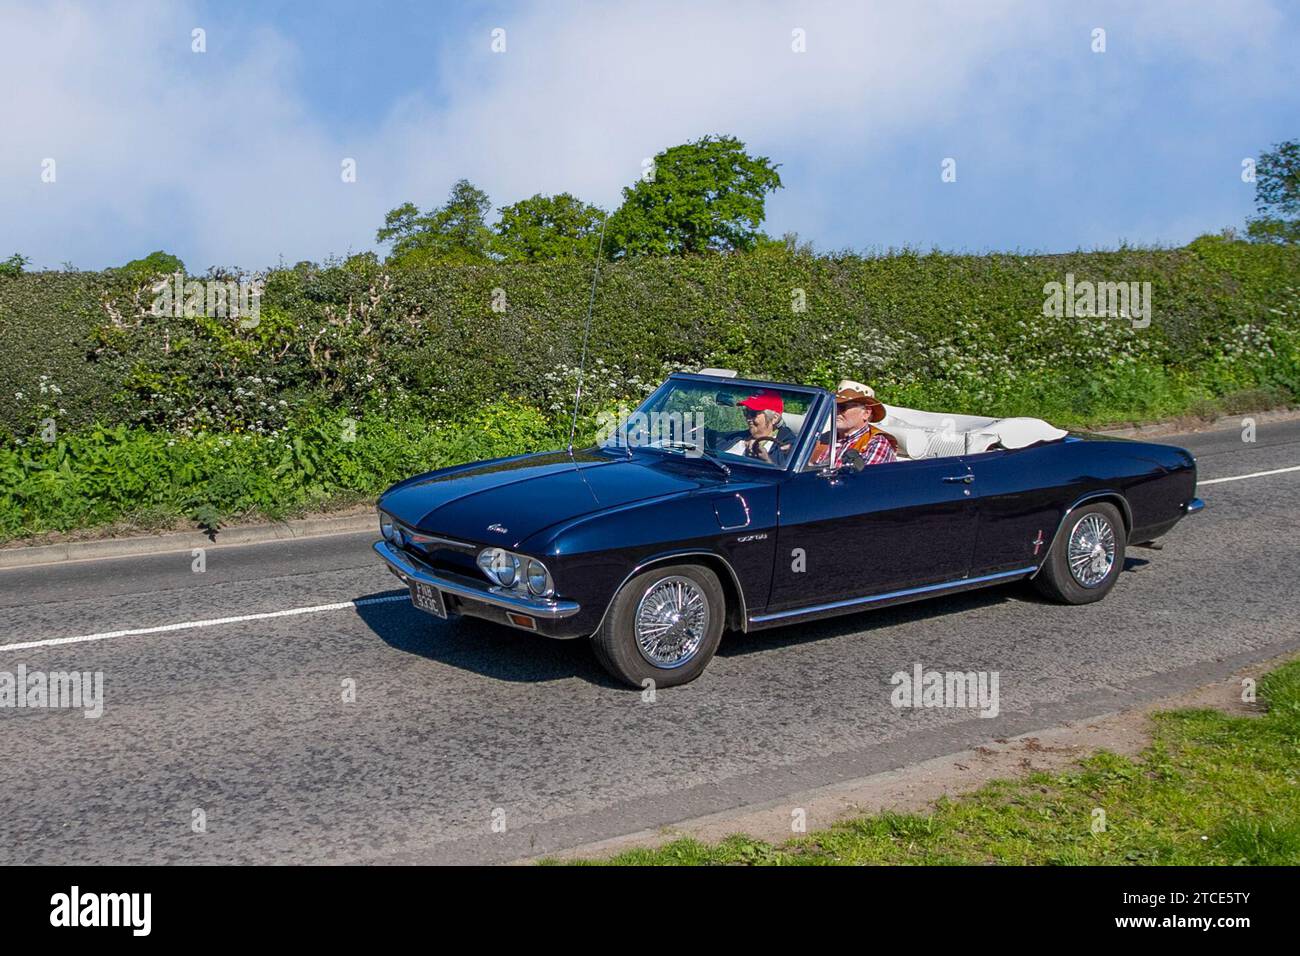 1965 60s sixties Black Chevrolet Corvair Chevy 2700cc petrol American convertible; Vintage, restored classic motors, automobile collectors motoring enthusiasts, historic veteran cars travelling in Cheshire, UK Stock Photo